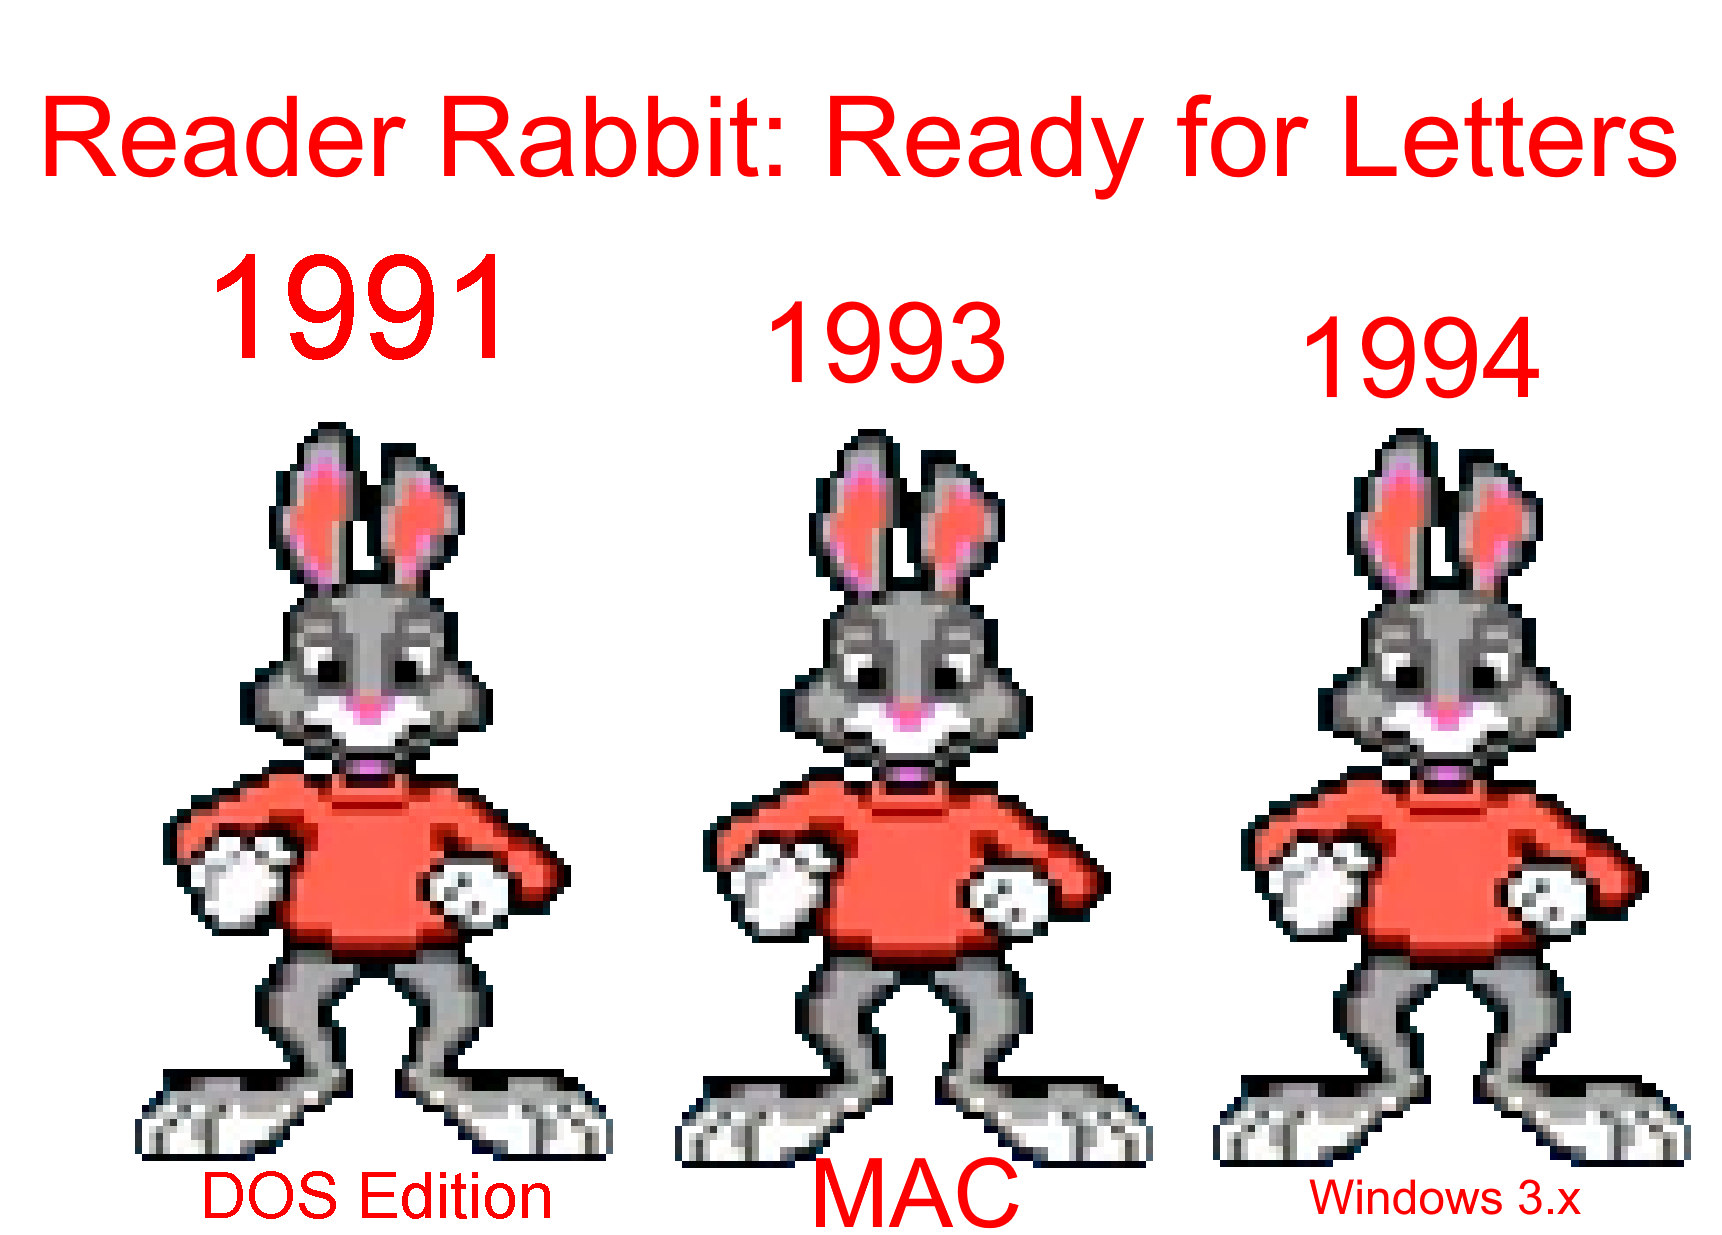 Reader Rabbit's Ready for Letters designs